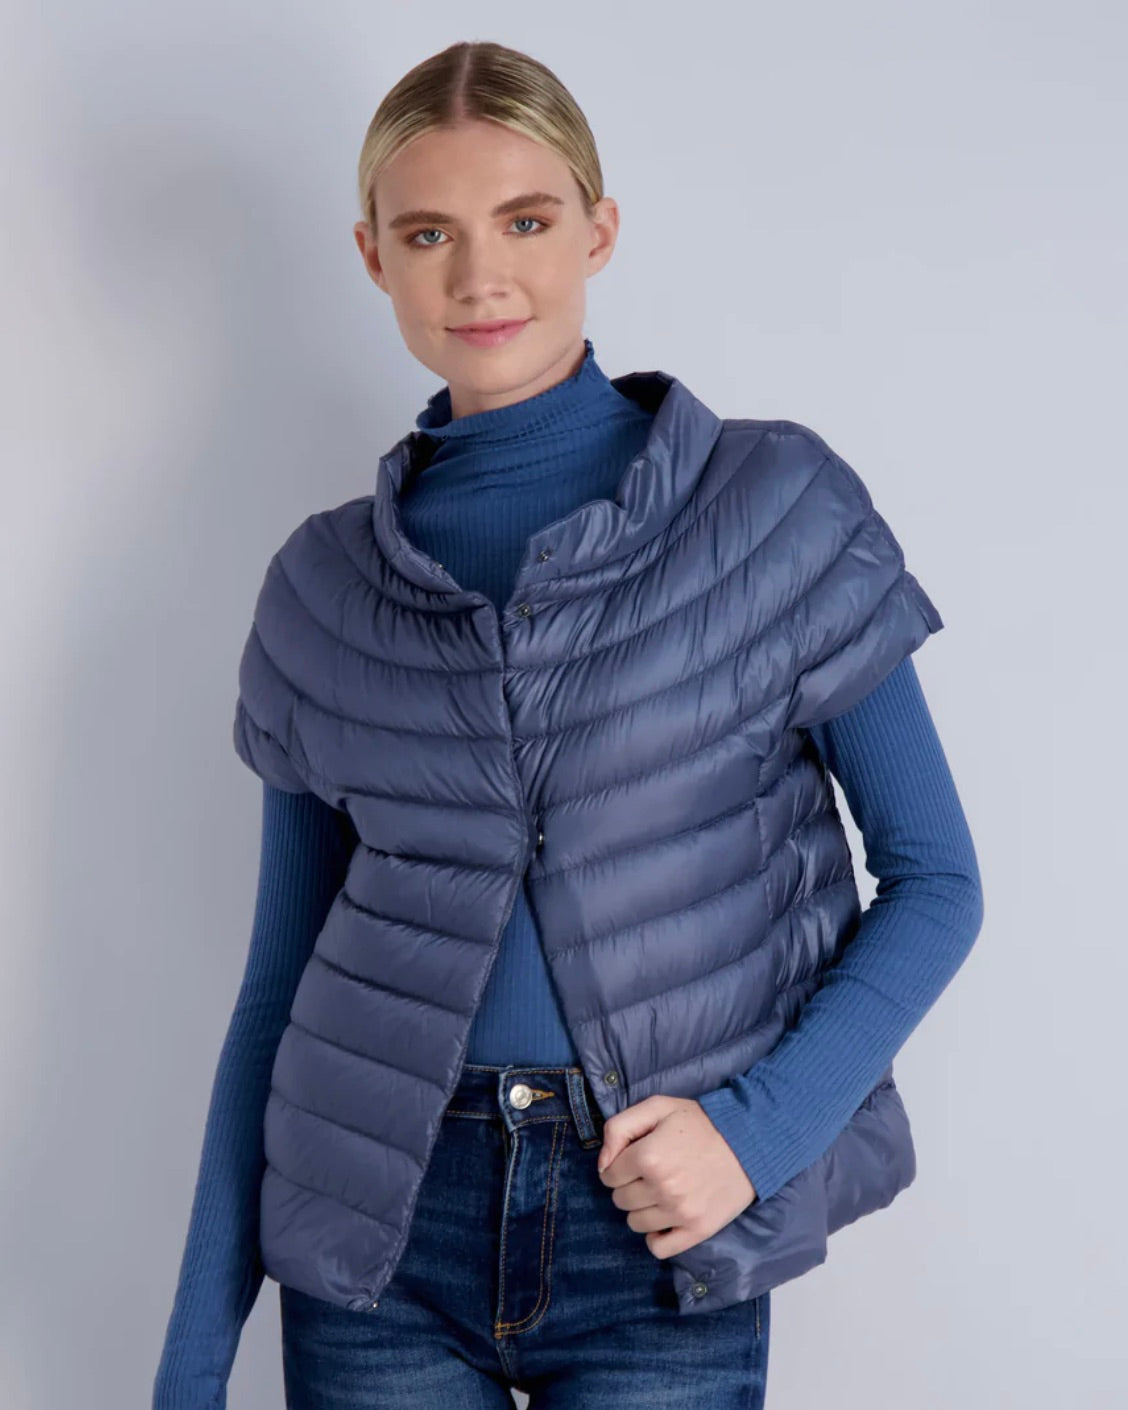 Model wearing Cotes of London St Barts Down Vest wearing jeans and a blue turtleneck on a white background 